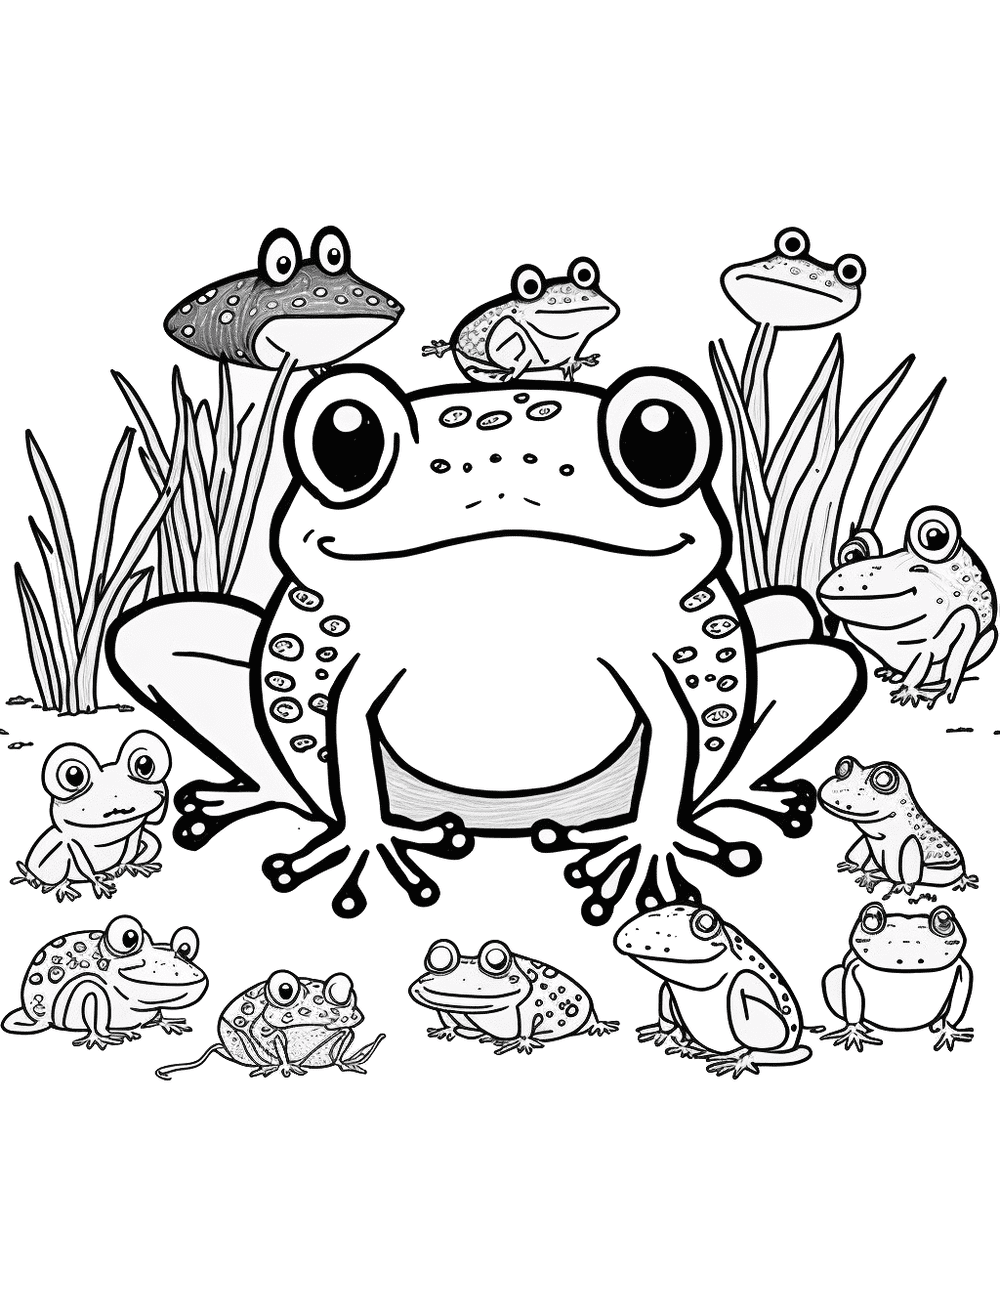 Frog Drawing For Kids | How to draw frog | Colouring painting | Kids drawing  | Toddlers |#frog - YouTube